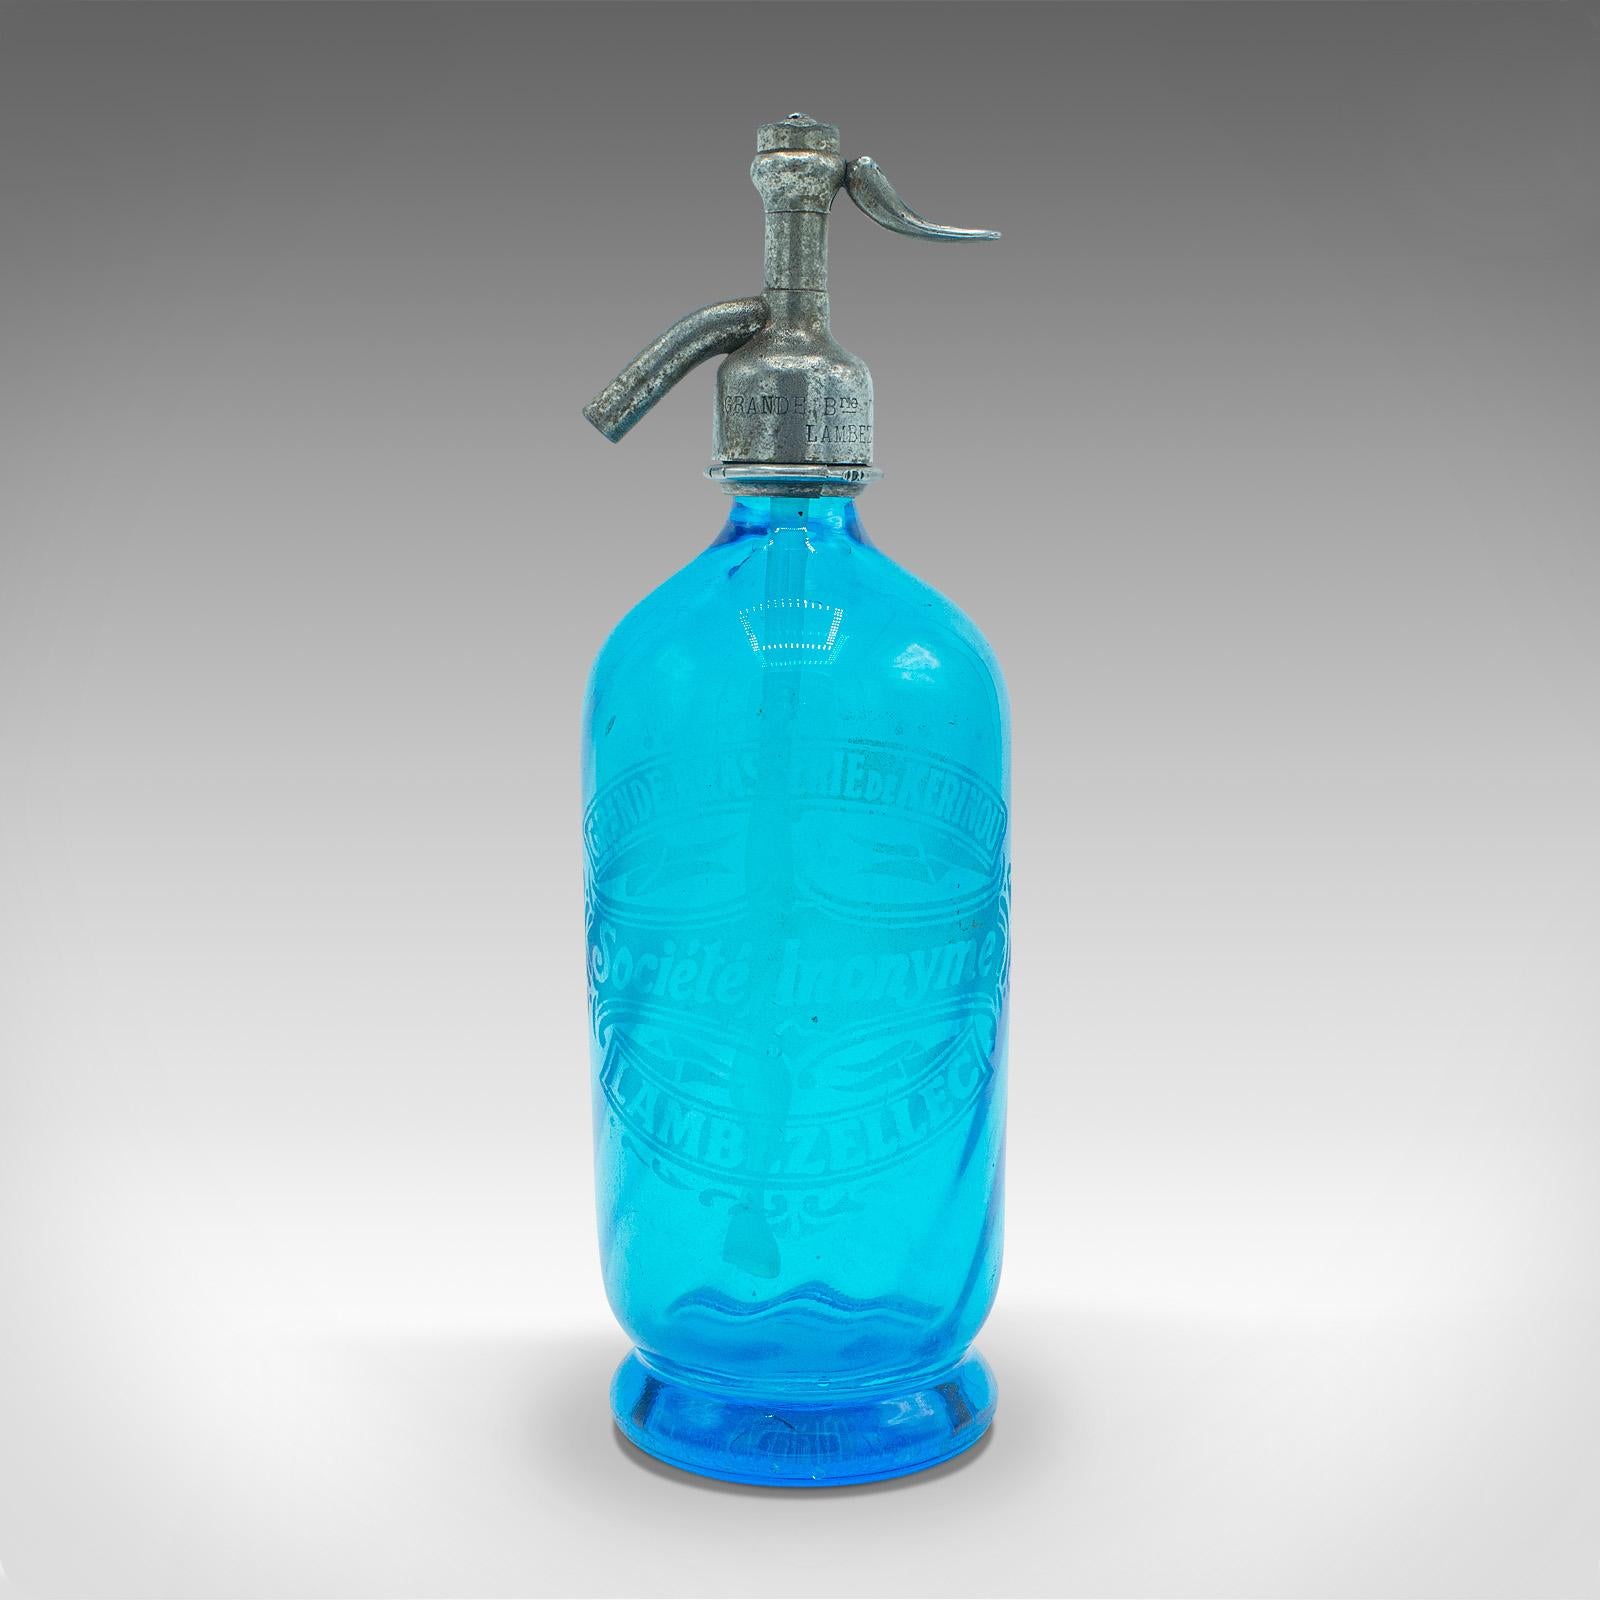 This is a vintage blue soda siphon. A French, decorative glass bistro seltzer bottle, dating to the early 20th century, circa 1930.

Striking glass siphon, with a delightful Continental appeal
Displays a desirable aged patina throughout
Radiant blue